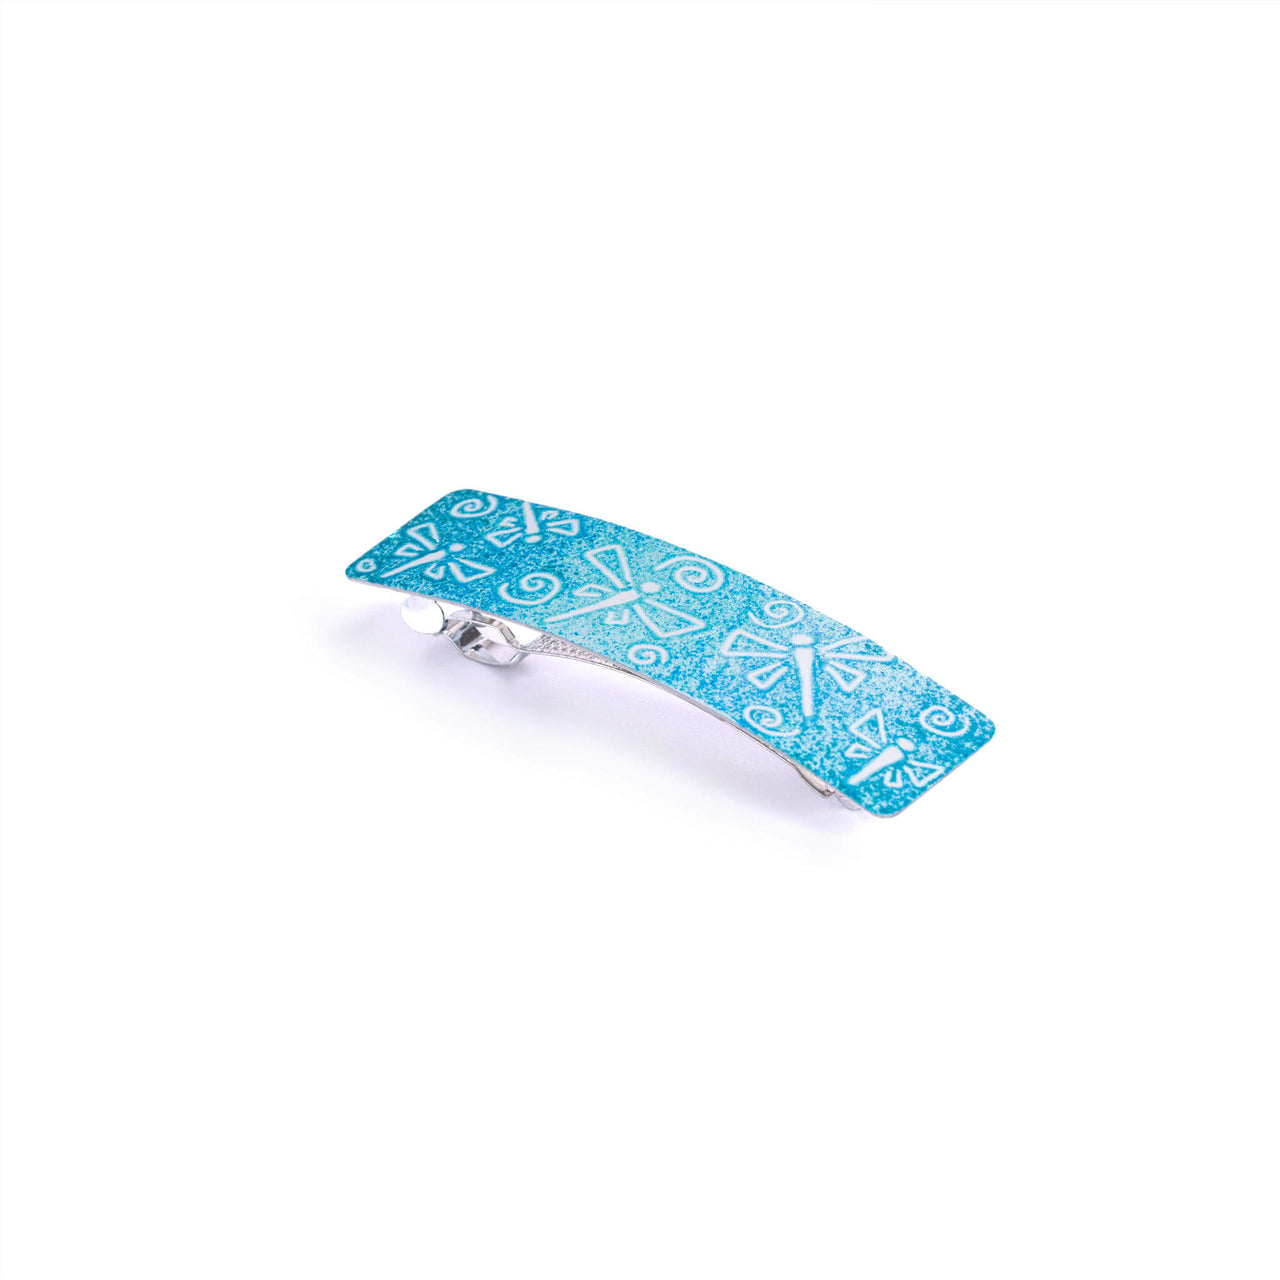 Dragonflies - Turquoise French Barrette